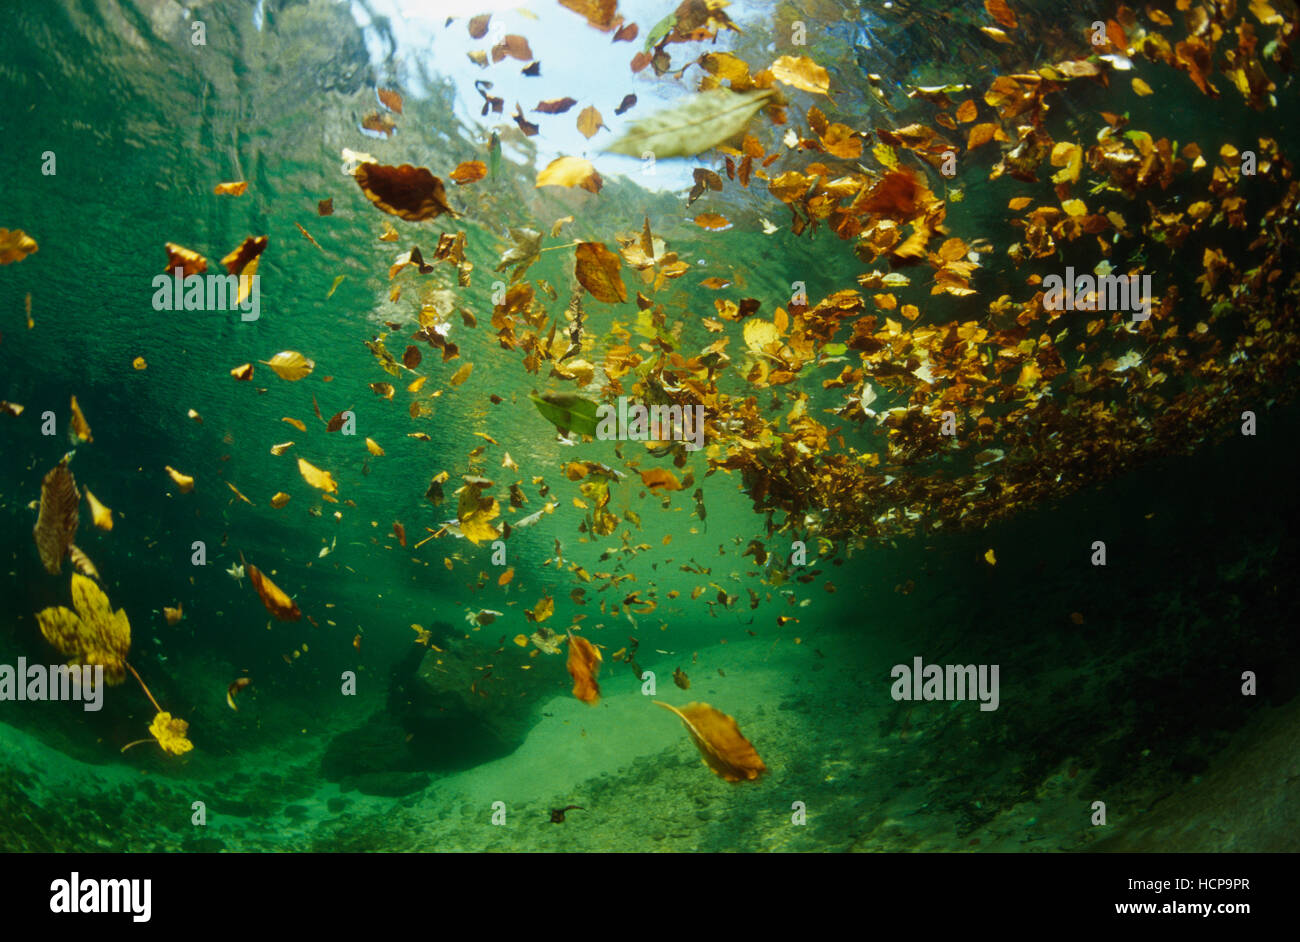 Underwater picture of a mountain stream with autumn leaves on the water surface Stock Photo